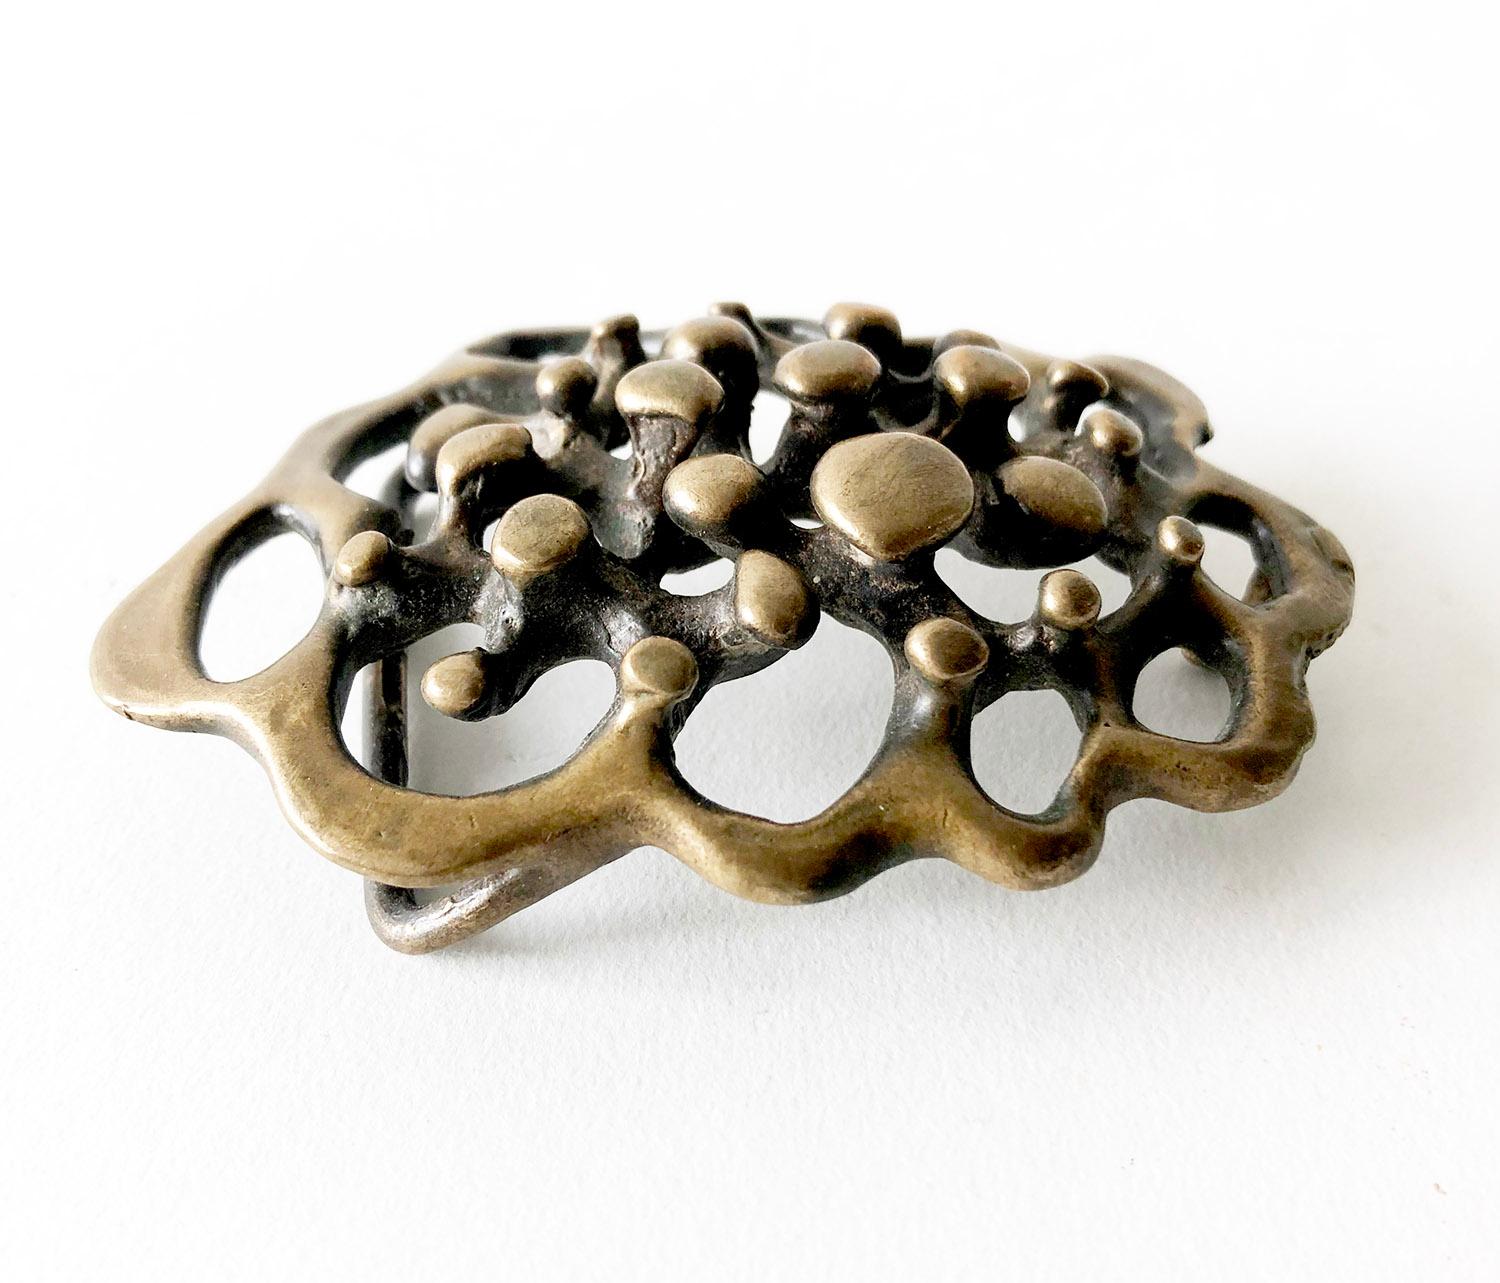 Hand forged, large scale spore belt buckle created by Jack Boyd of San Diego, California.  Buckle measures 3